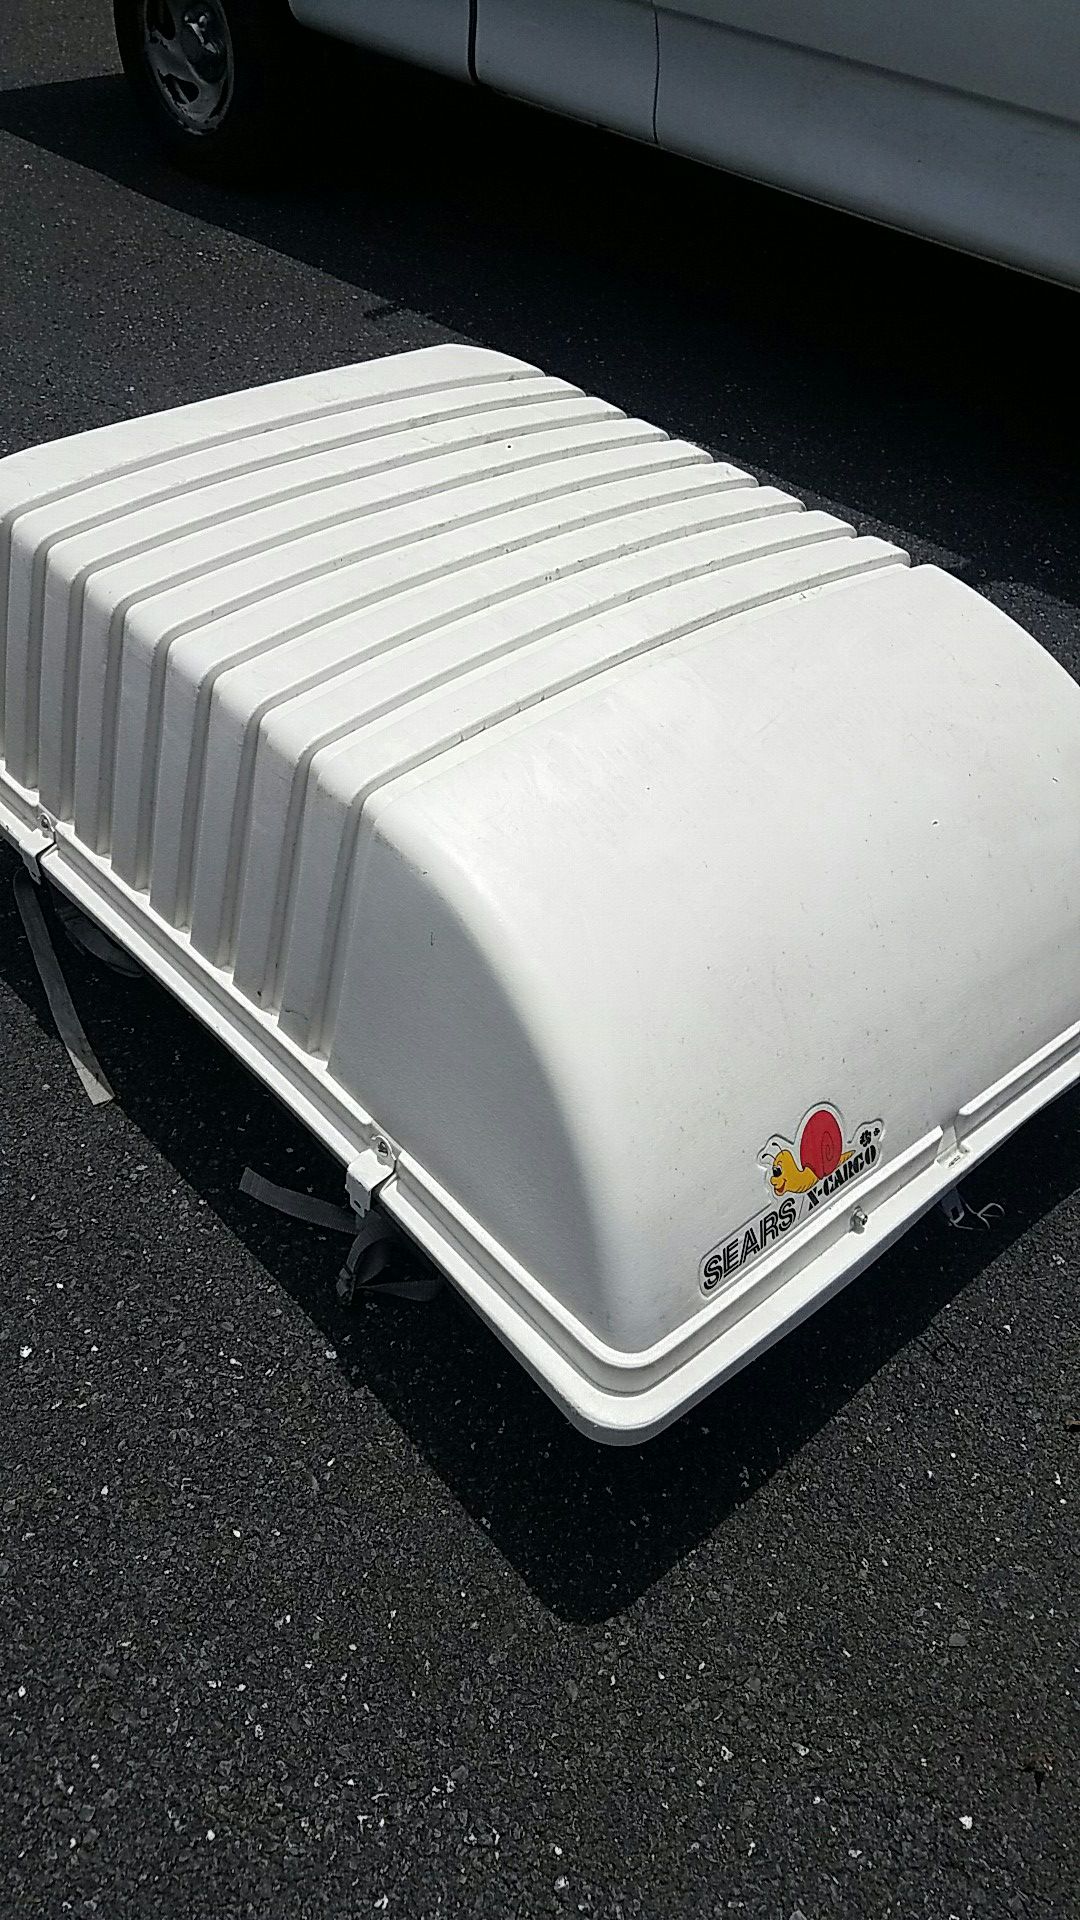 "Sears" roof top cargo carrier